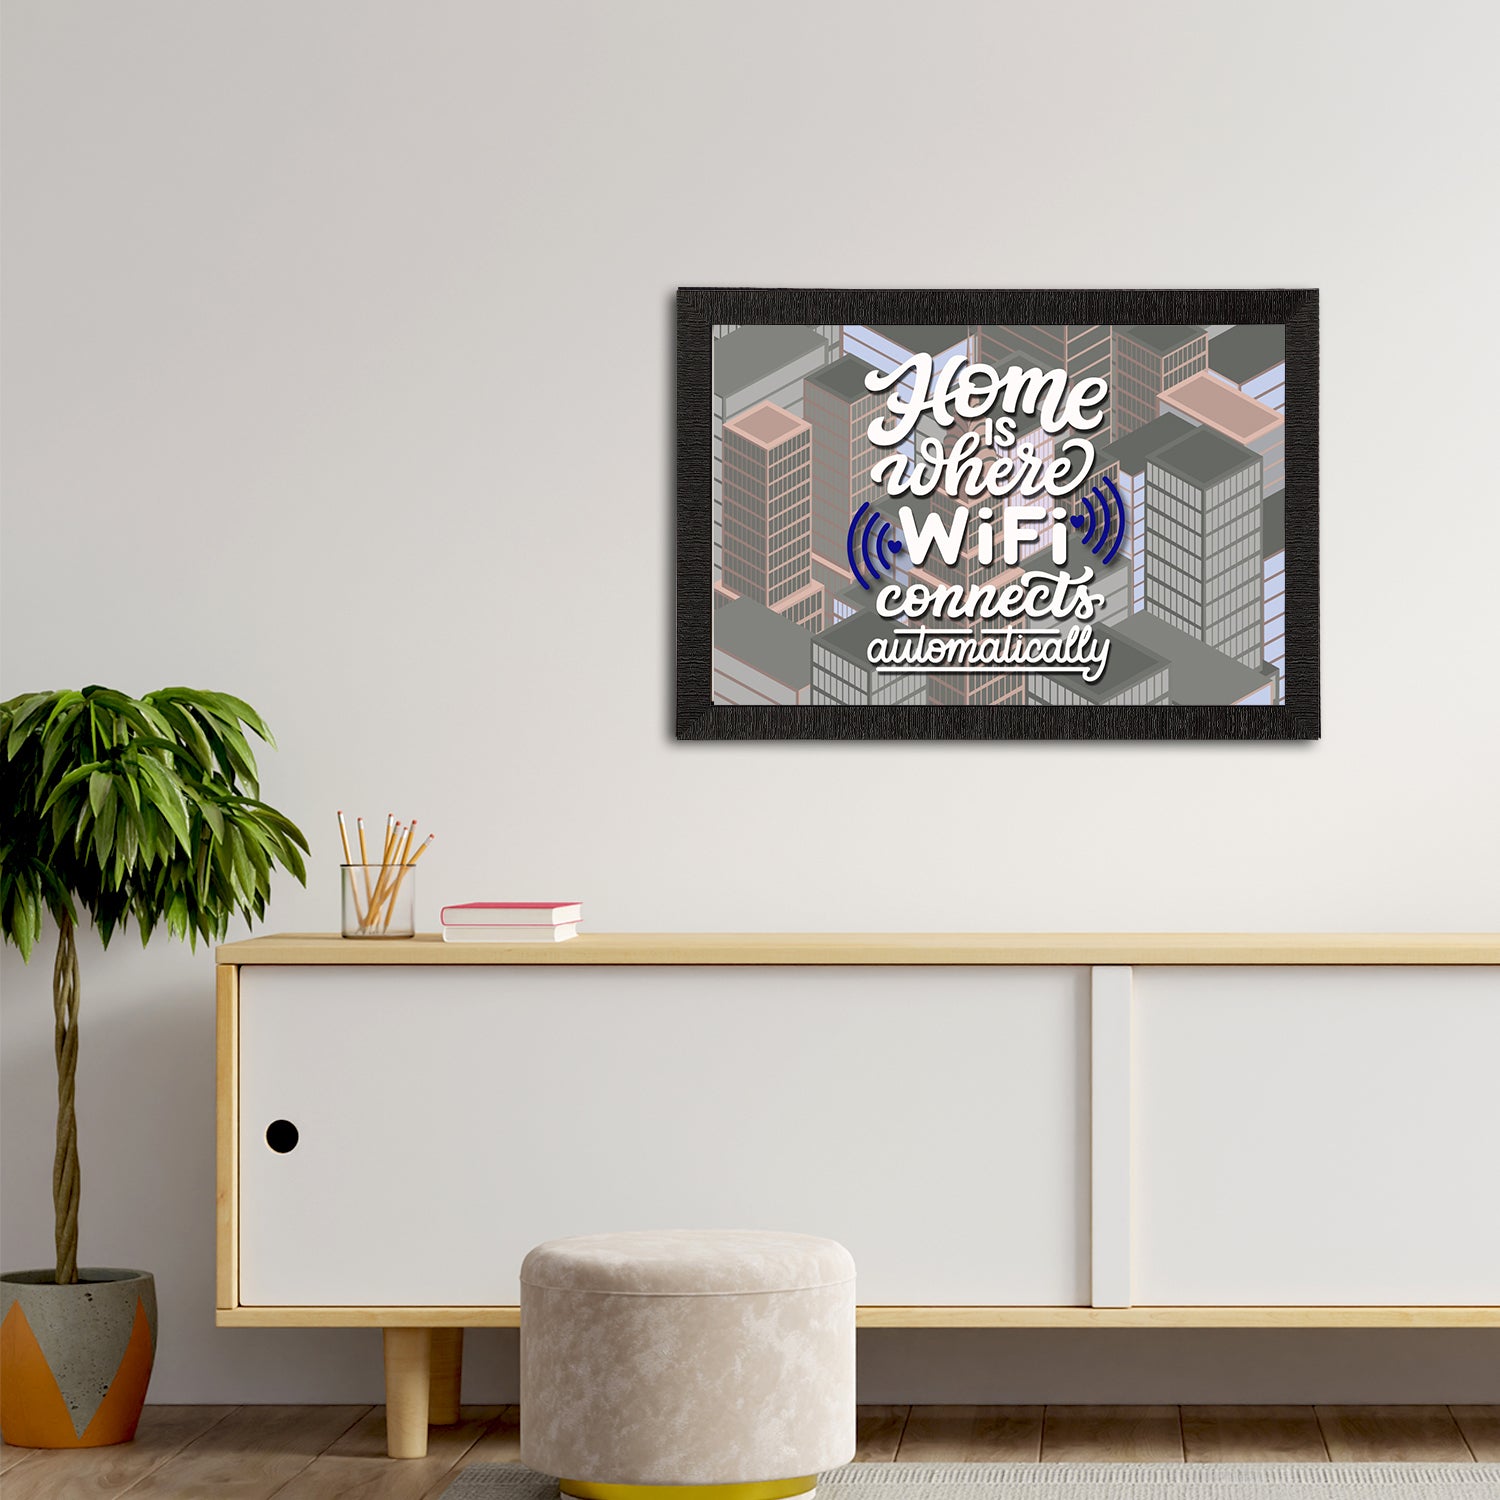 Home Is Where WiFi Connects Automatically" Motivational Quote Satin Matt Texture UV Art Painting 2